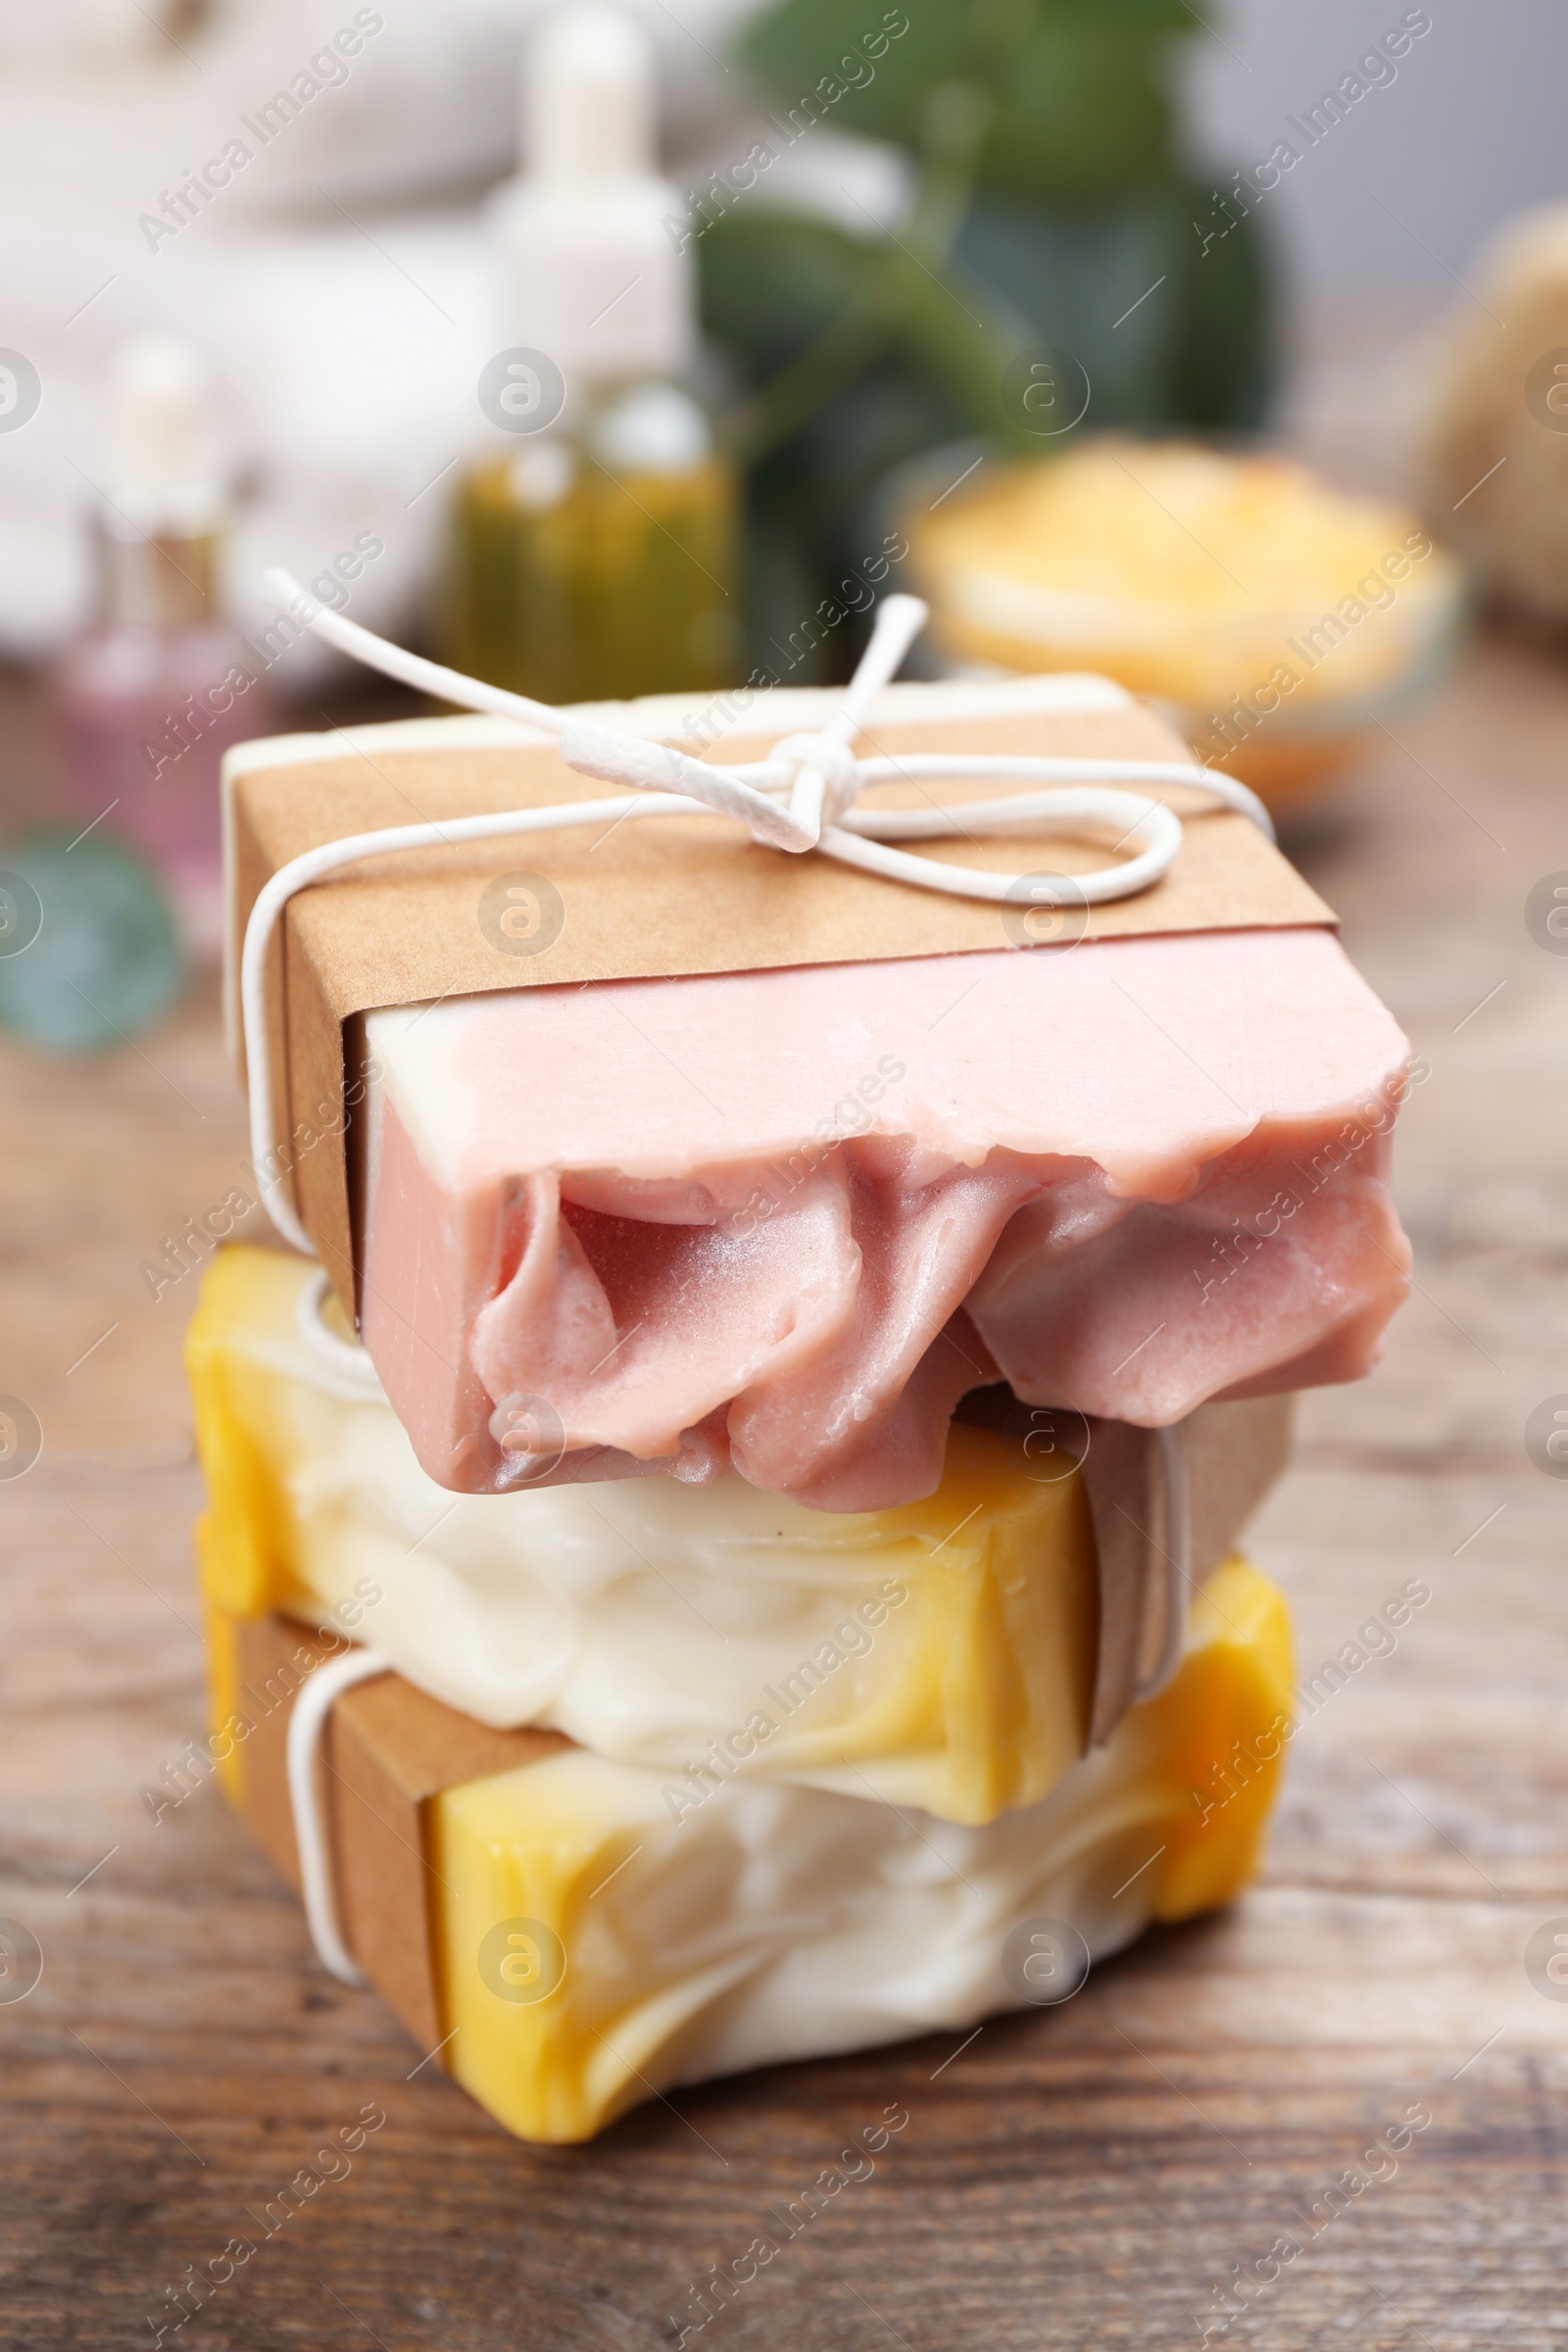 Photo of Natural handmade soap bars on wooden table